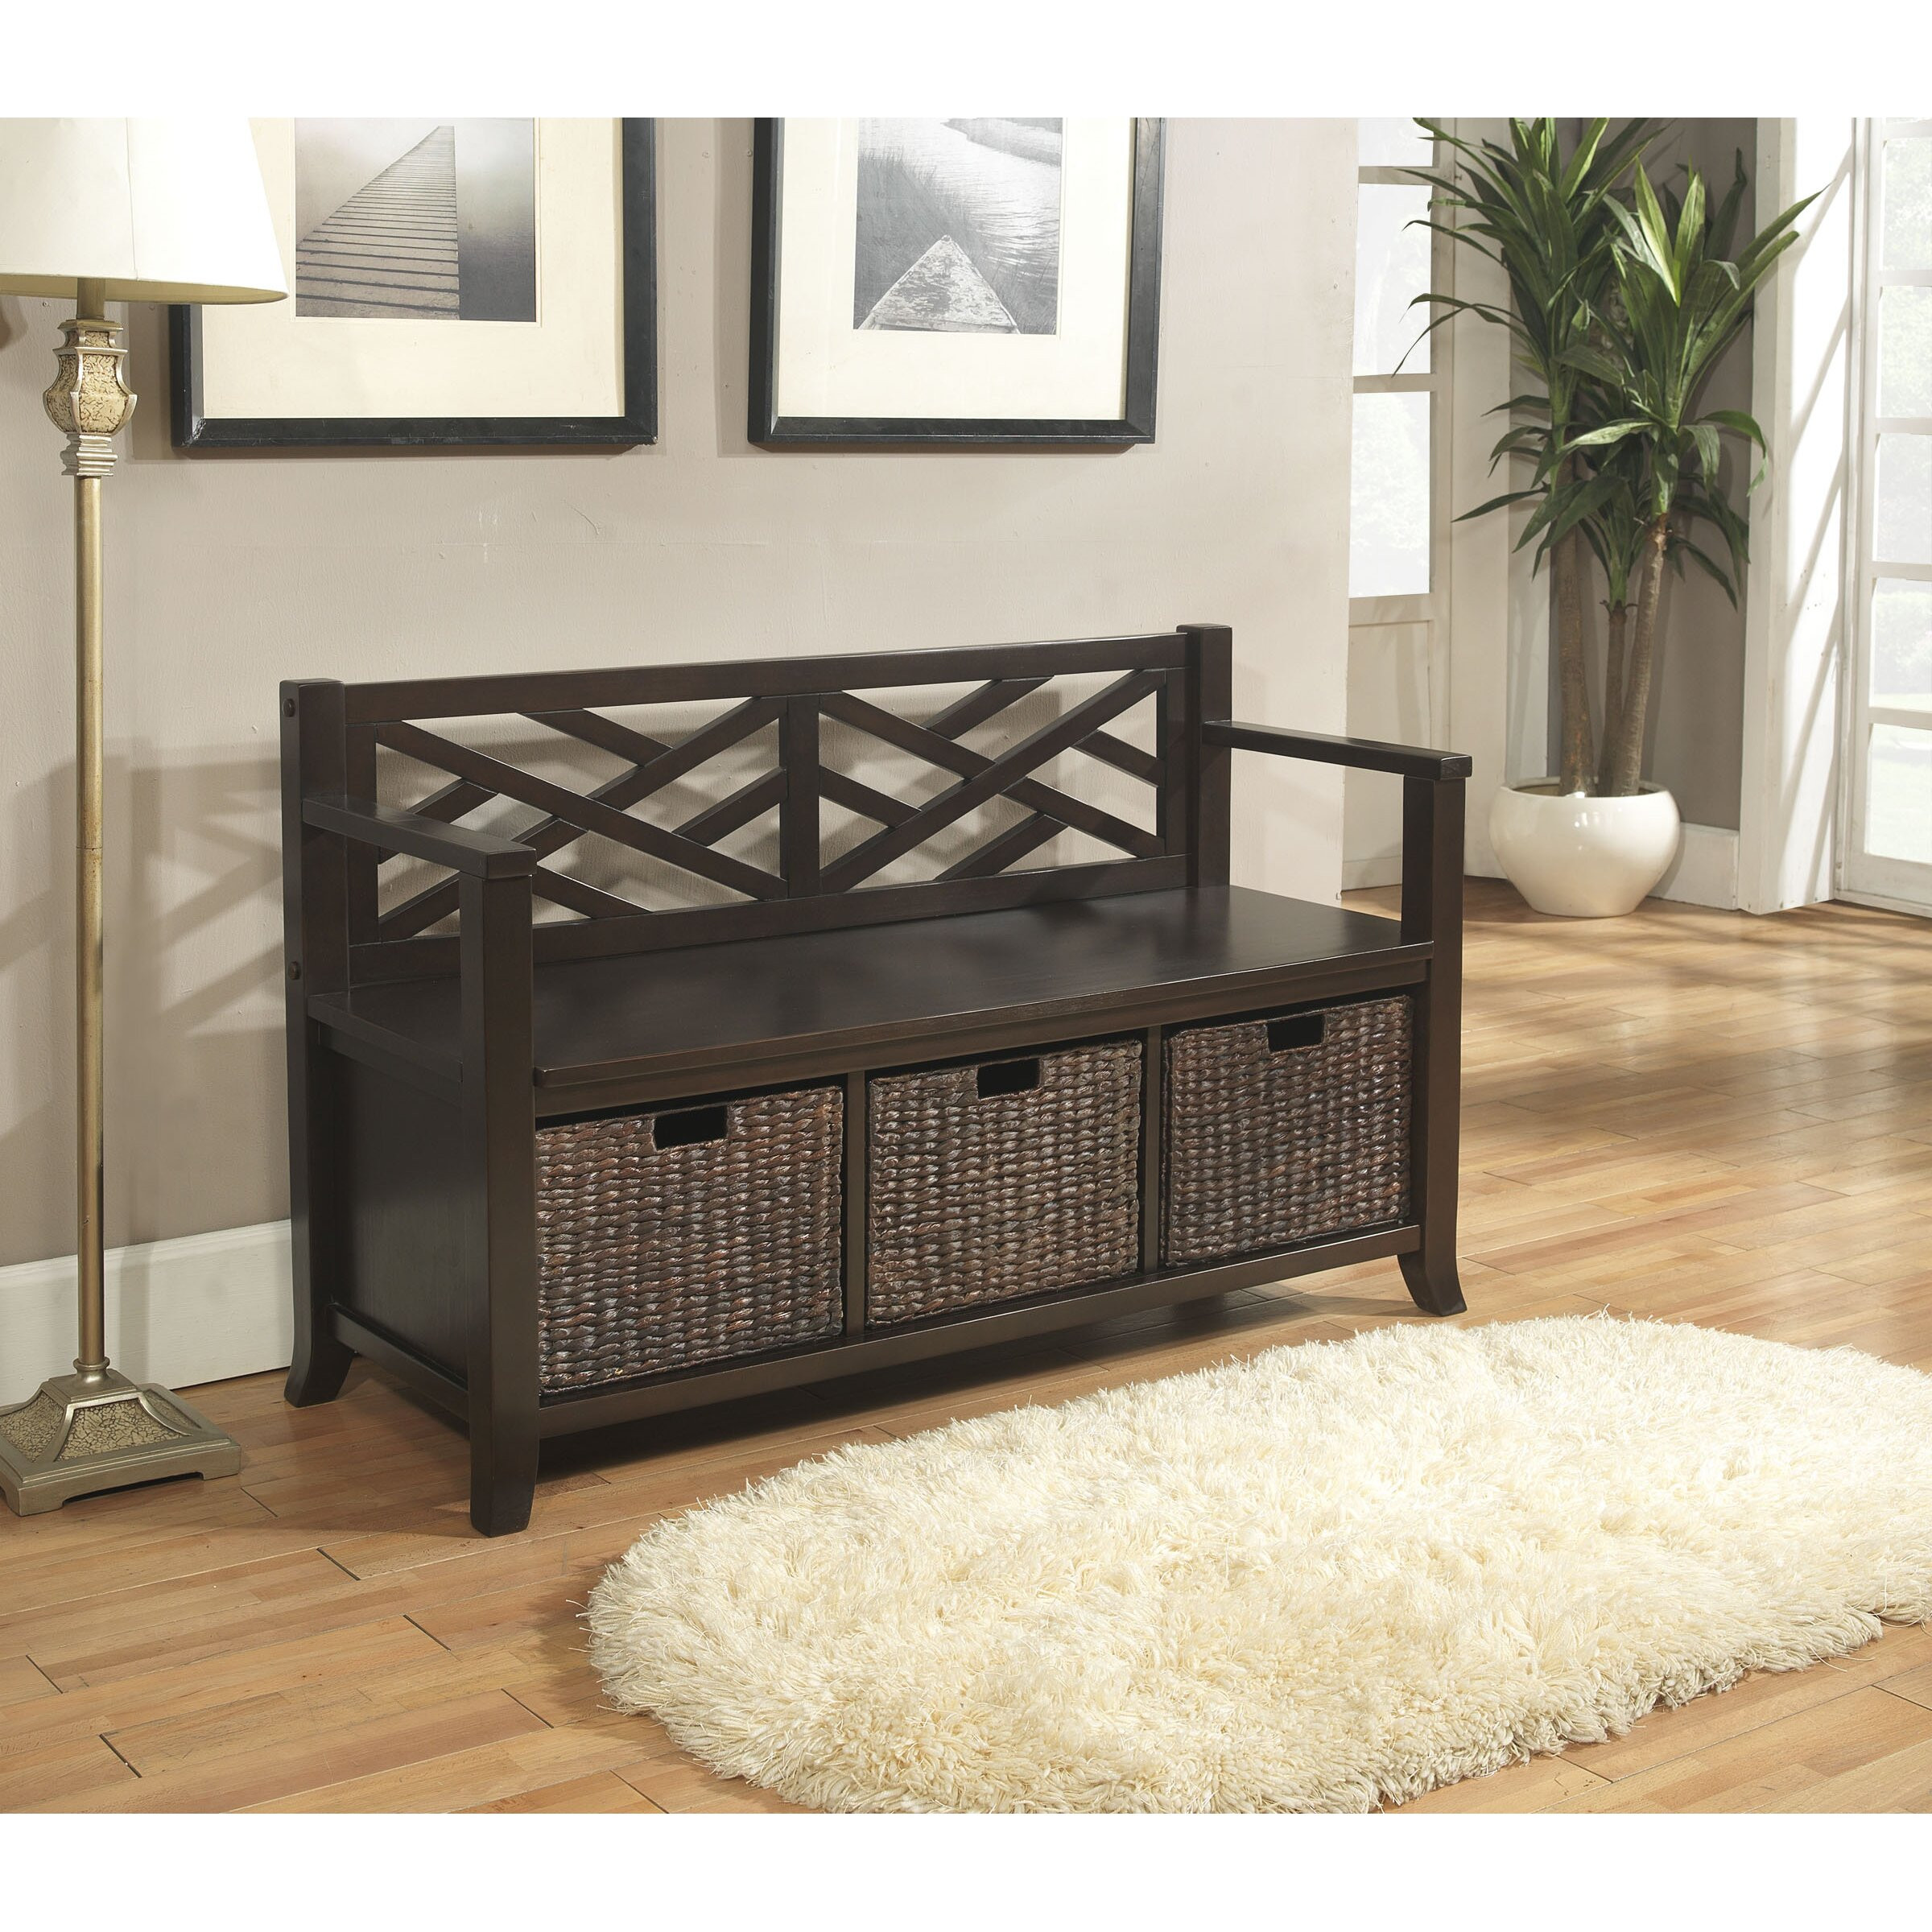 Bench For Entryway With Storage
 Simpli Home Adrien Entryway Storage Bench & Reviews